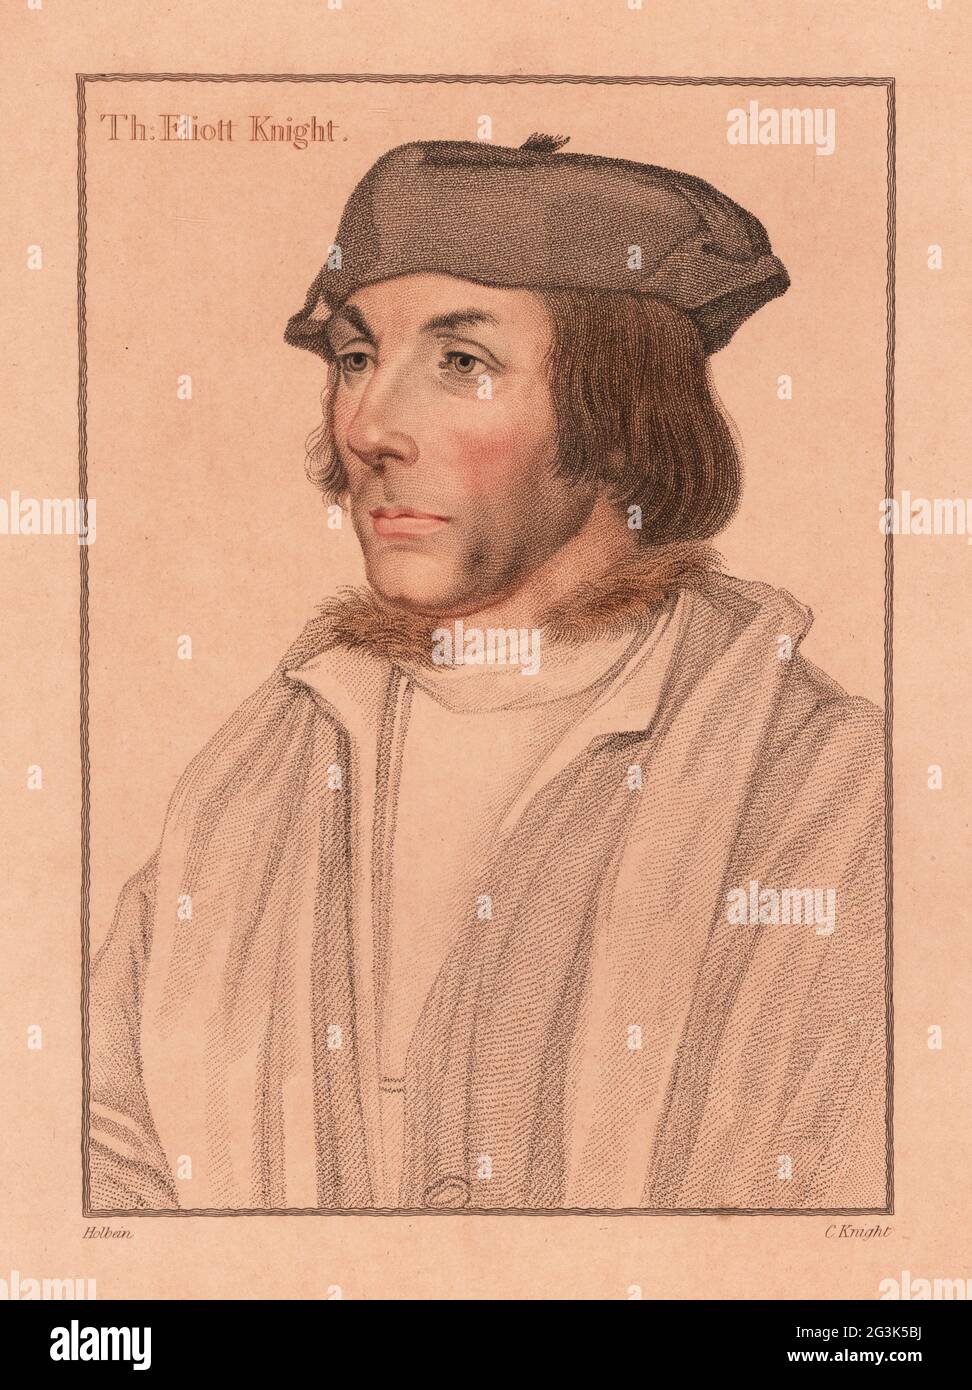 Sir Thomas Elyot, English diplomat and scholar (1490-1546).  Ambassador to the Holy Roman Emperor. Thomas Eliott, Knight. Handcoloured copperplate stipple engraving by Charles Knight after a portrait by Hans Holbein the Younger  printed on pink paper from Imitations of Original Drawings by Hans Holbein, John Chamberlaine, London, 1812. Stock Photo